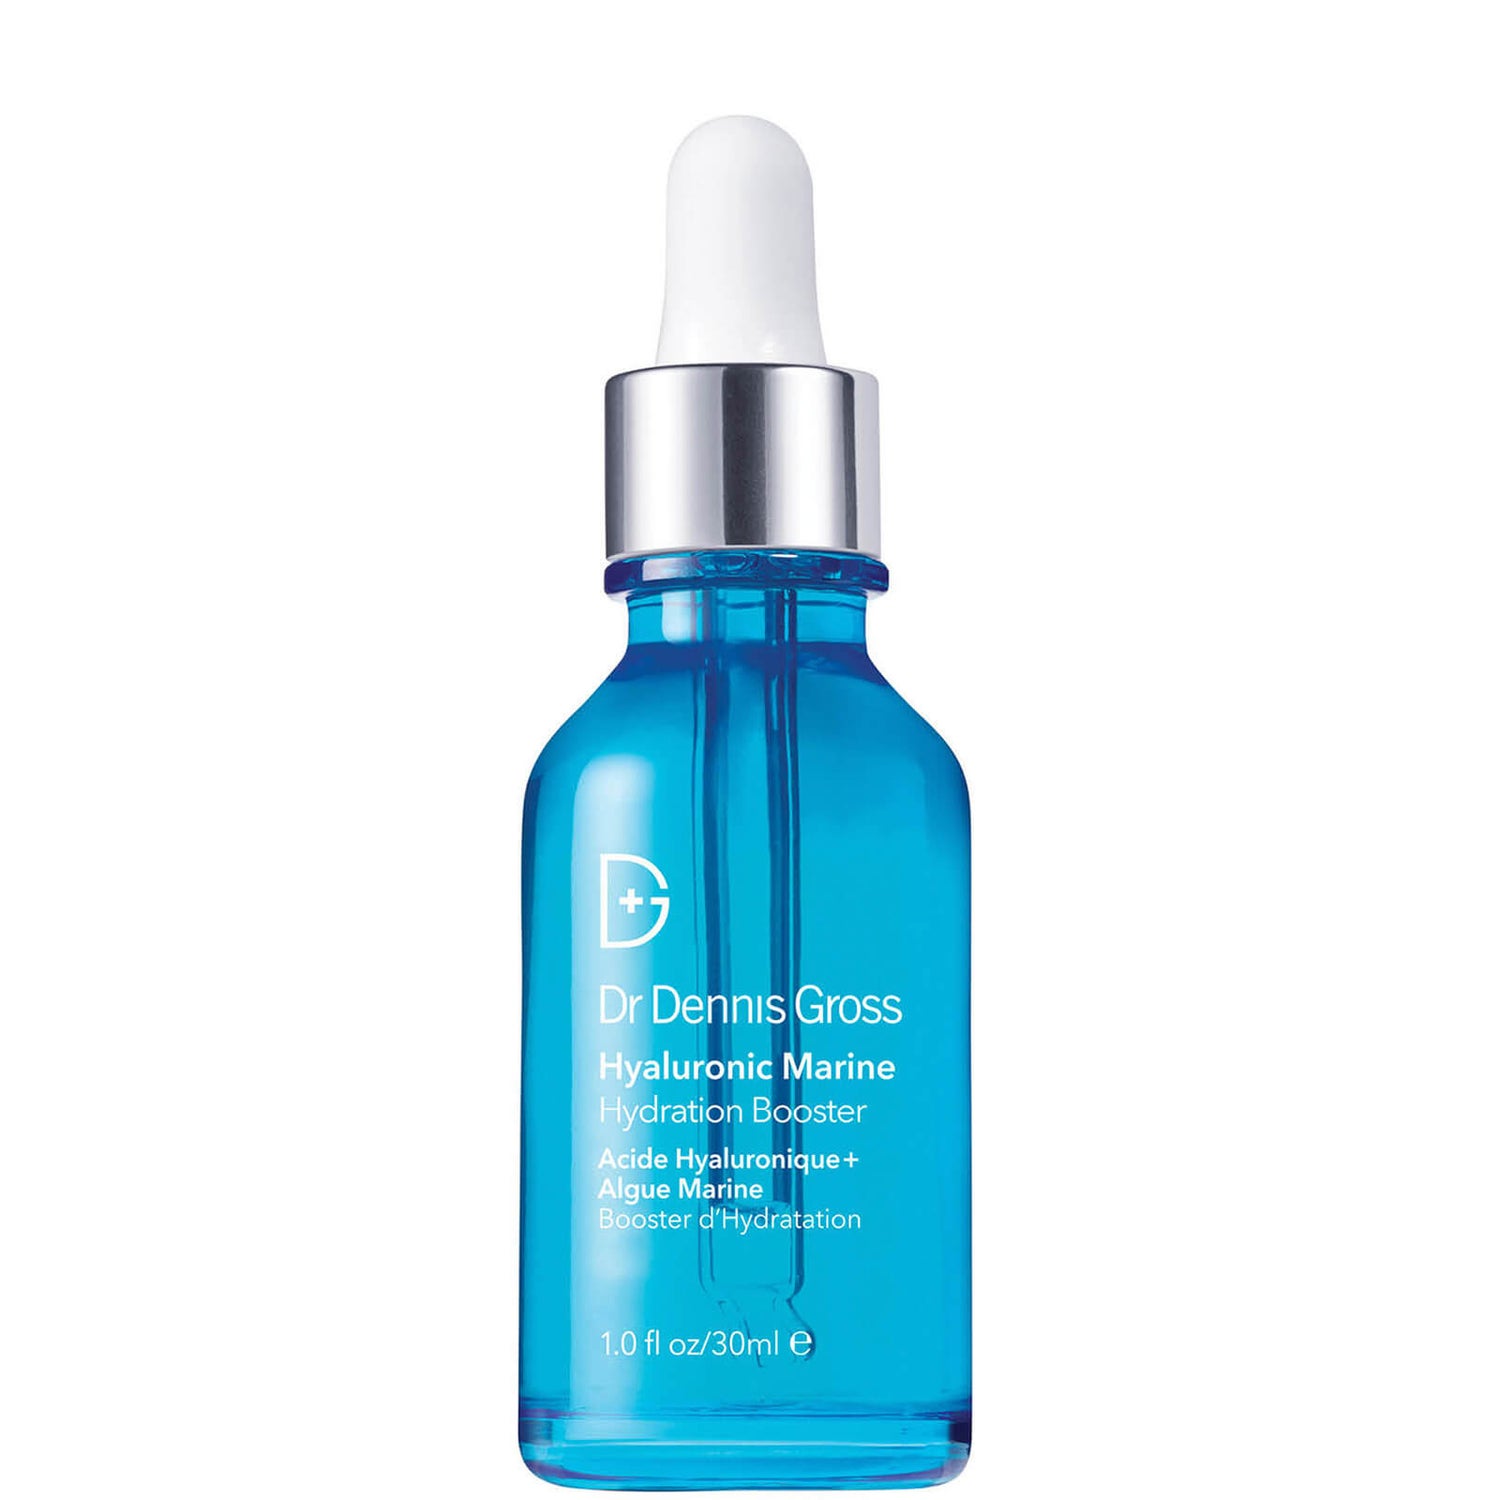 Dr Dennis Gross Skincare Clinical Concentrate Hydration Booster (30ml)